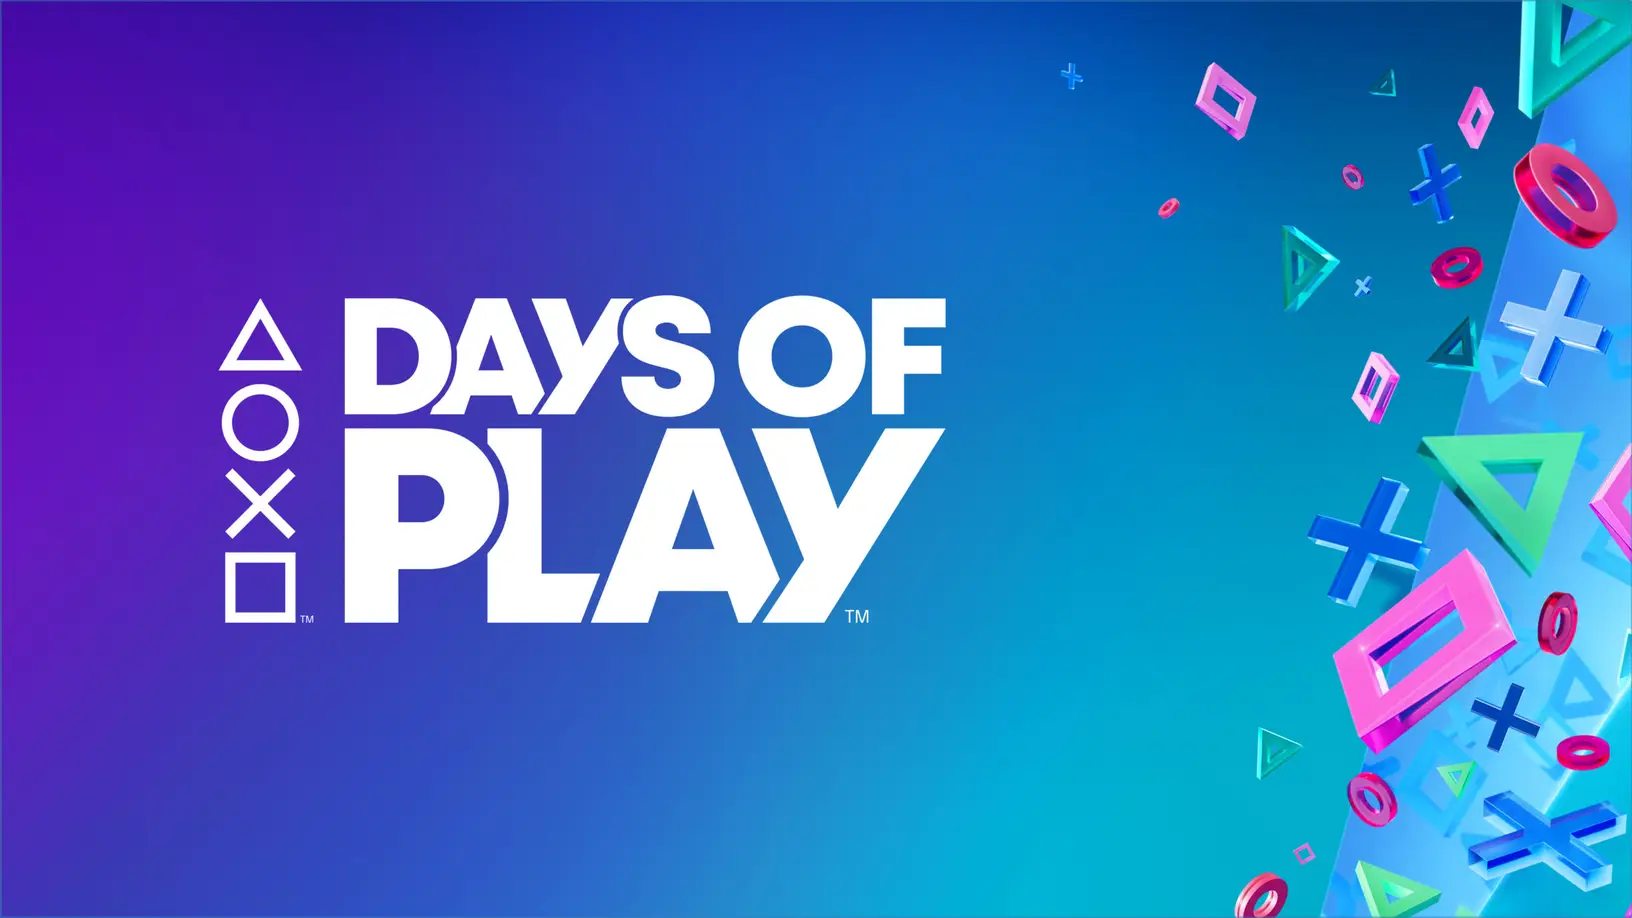 PlayStation Days of Play Sale